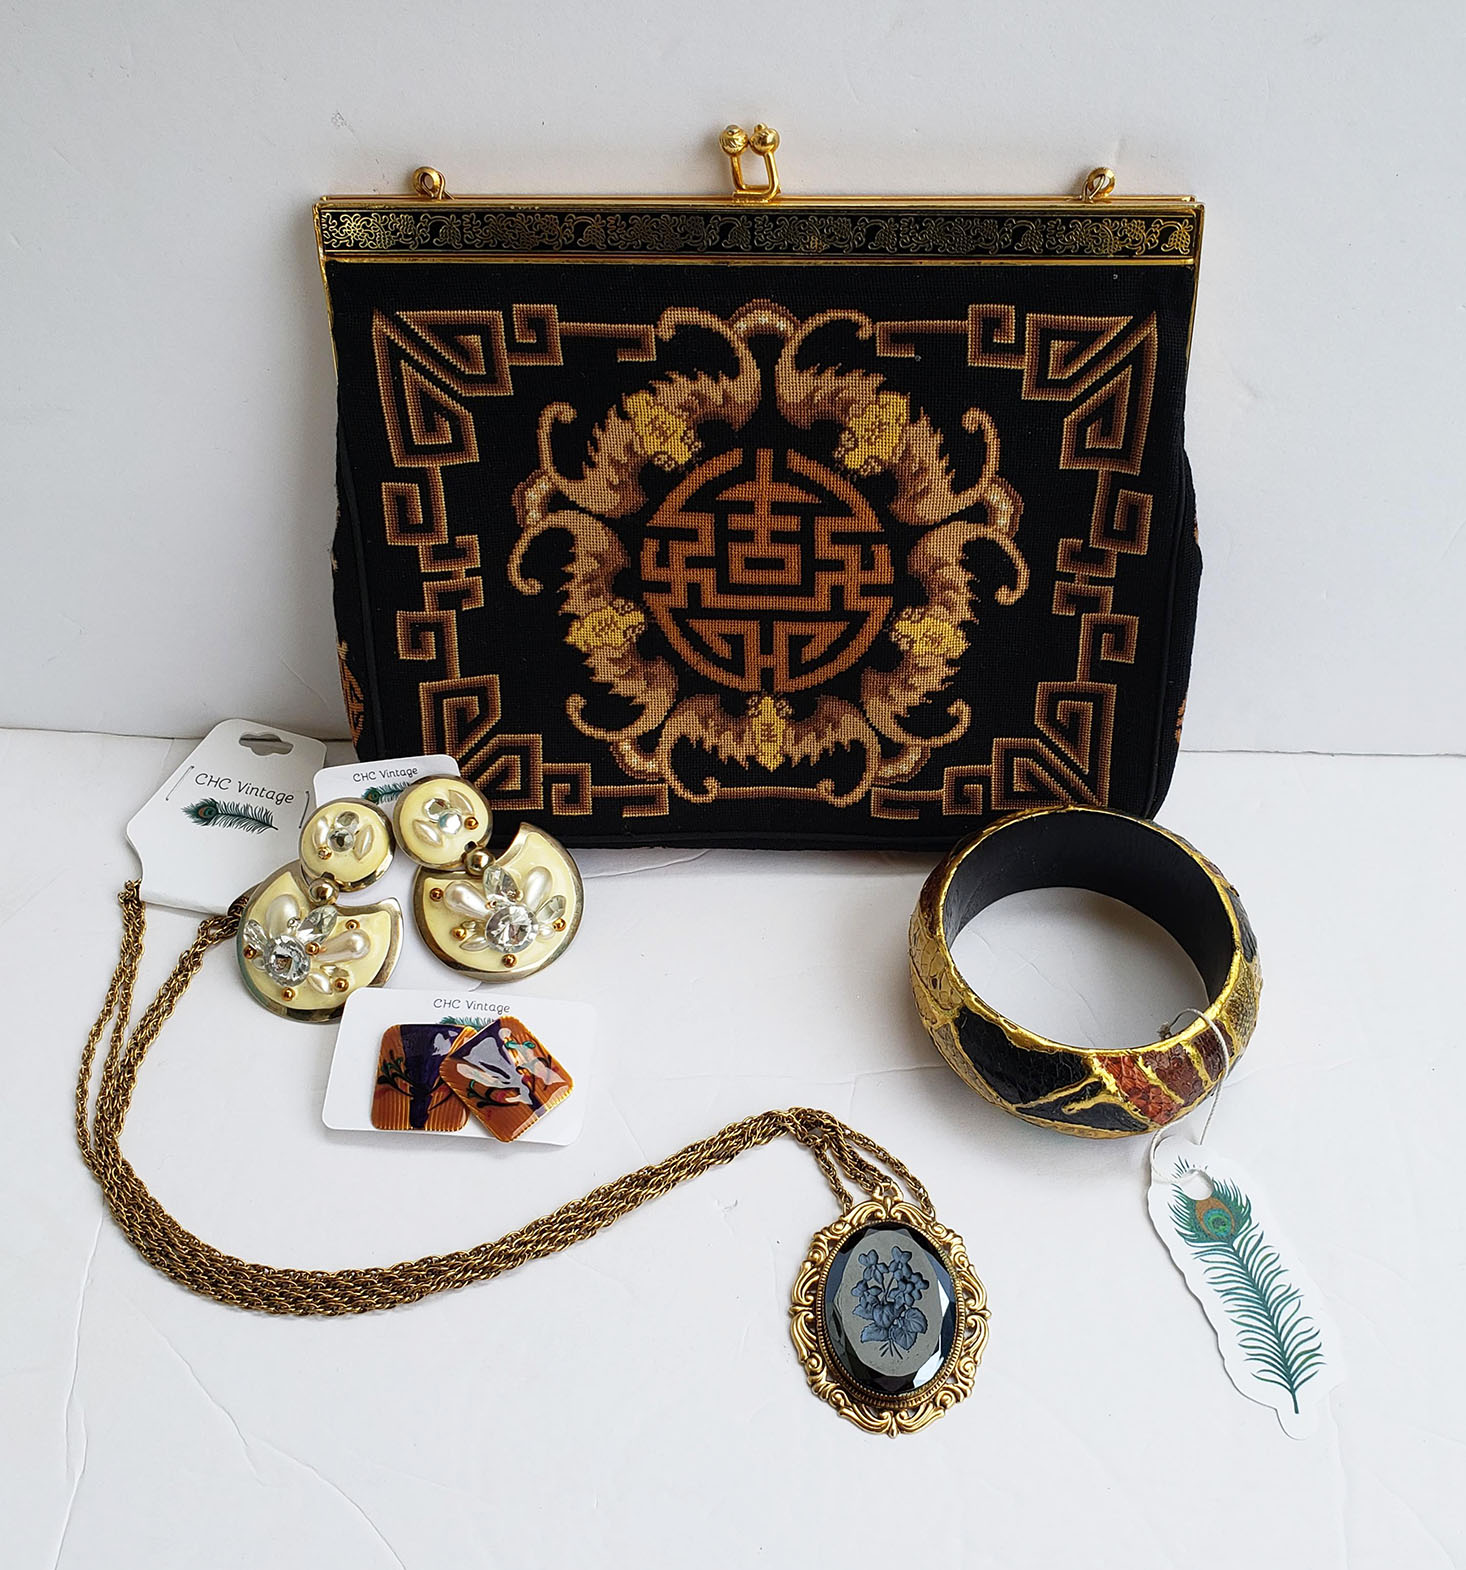 CHC Vintage Accessories Box Review – September 2018